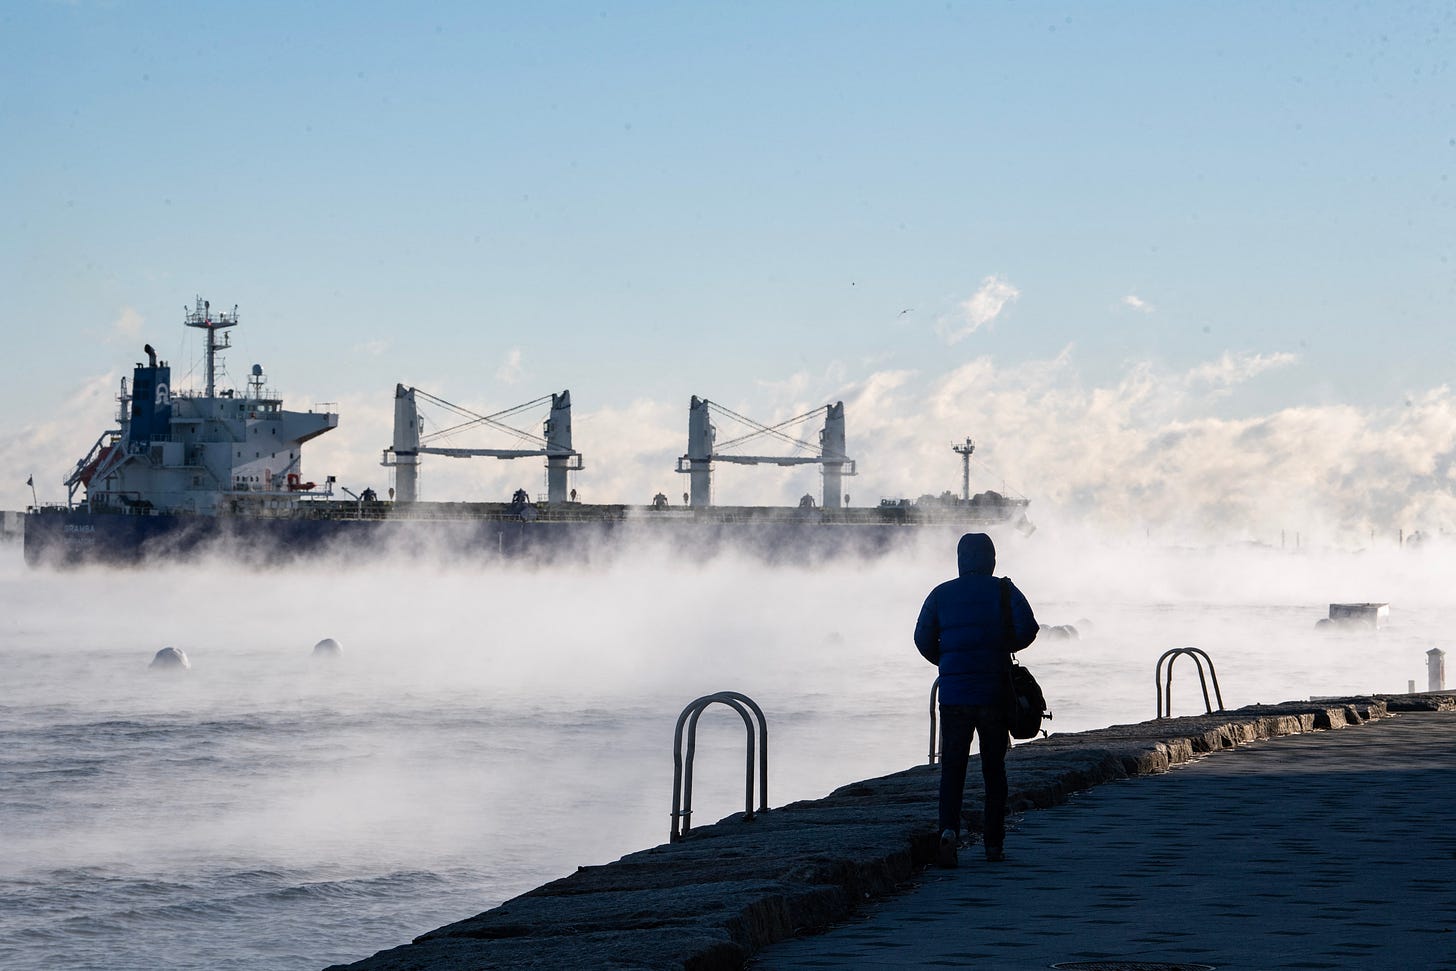 Steam rises from Boston Harbor as temperatures reach -7F (-14C) in Boston, Massachusetts, on February 4, 2023. (Photo by Joseph Prezioso/AFP via Getty Images)